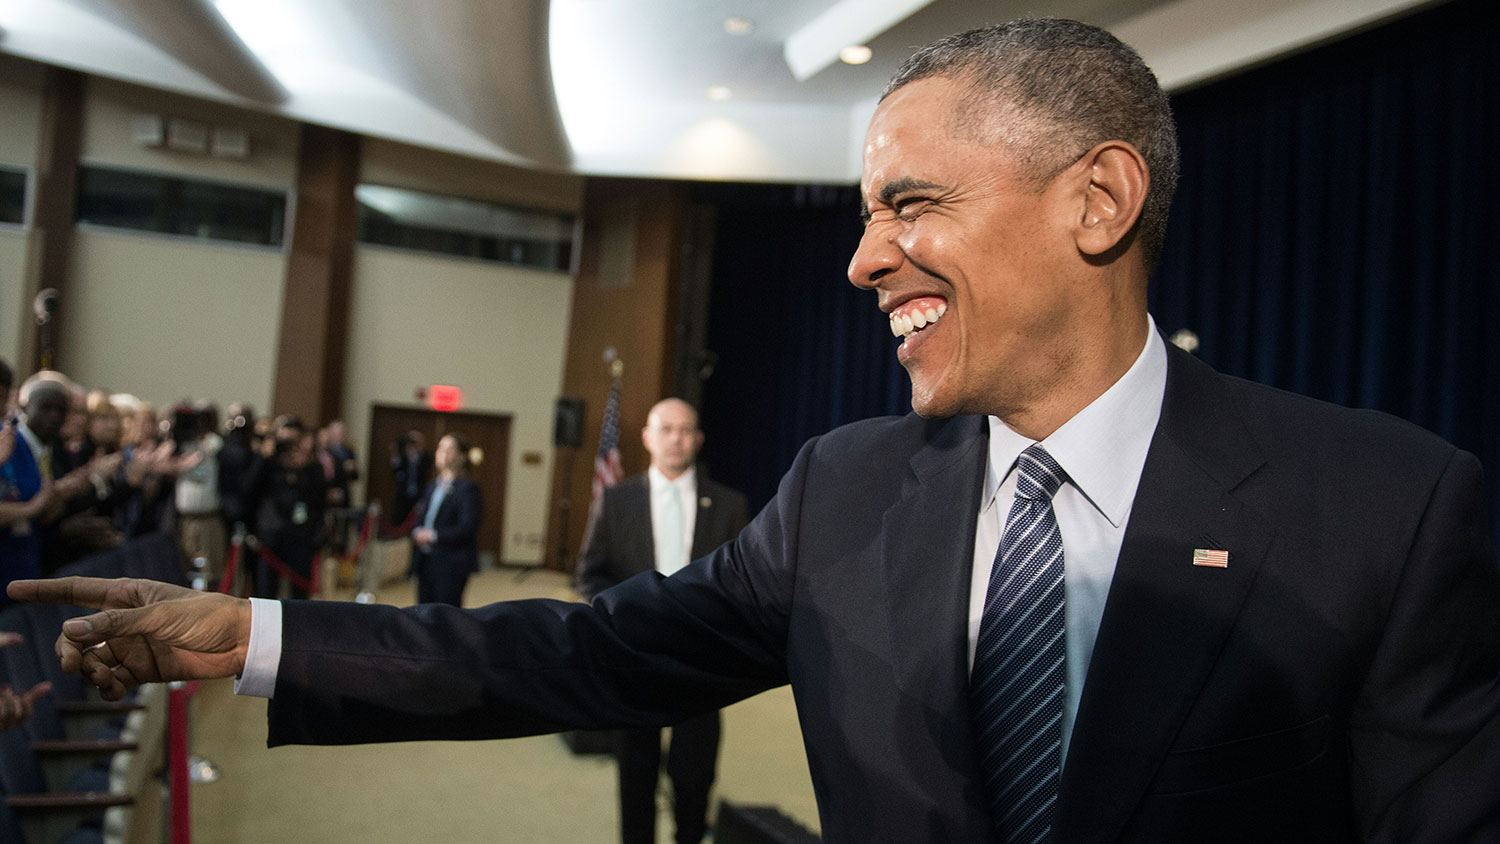 President Barack Obama greets an attendee at the Chief of Missions conference at the State Department in Washington on March 14, 2016.
